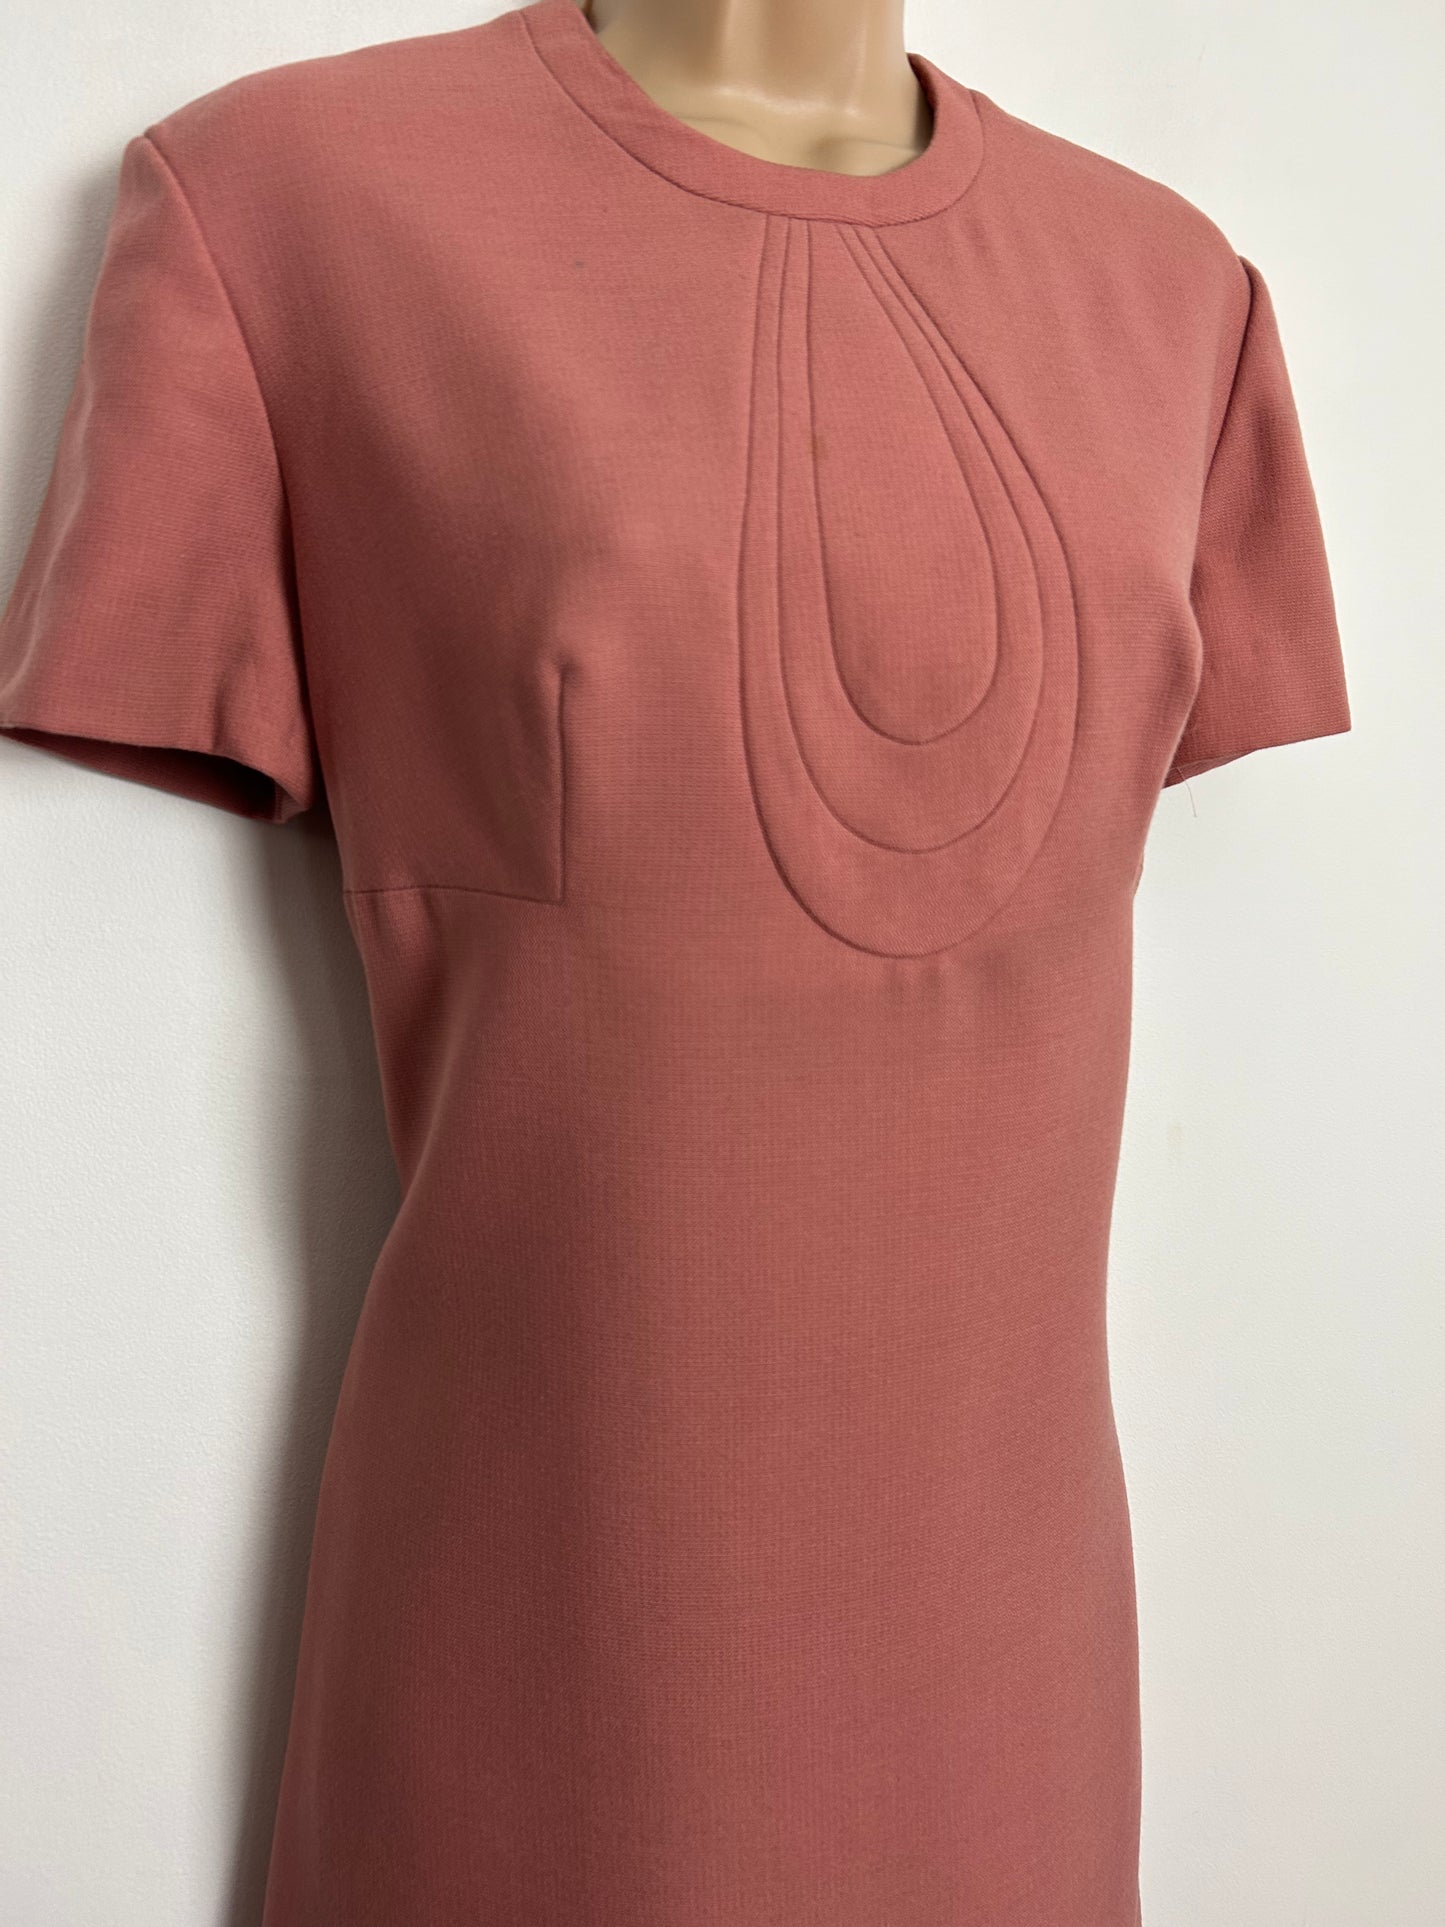 Vintage 1960s UK Size 10-12 Nude Pink Pure New Wool Short Sleeve Mod Shift Dress